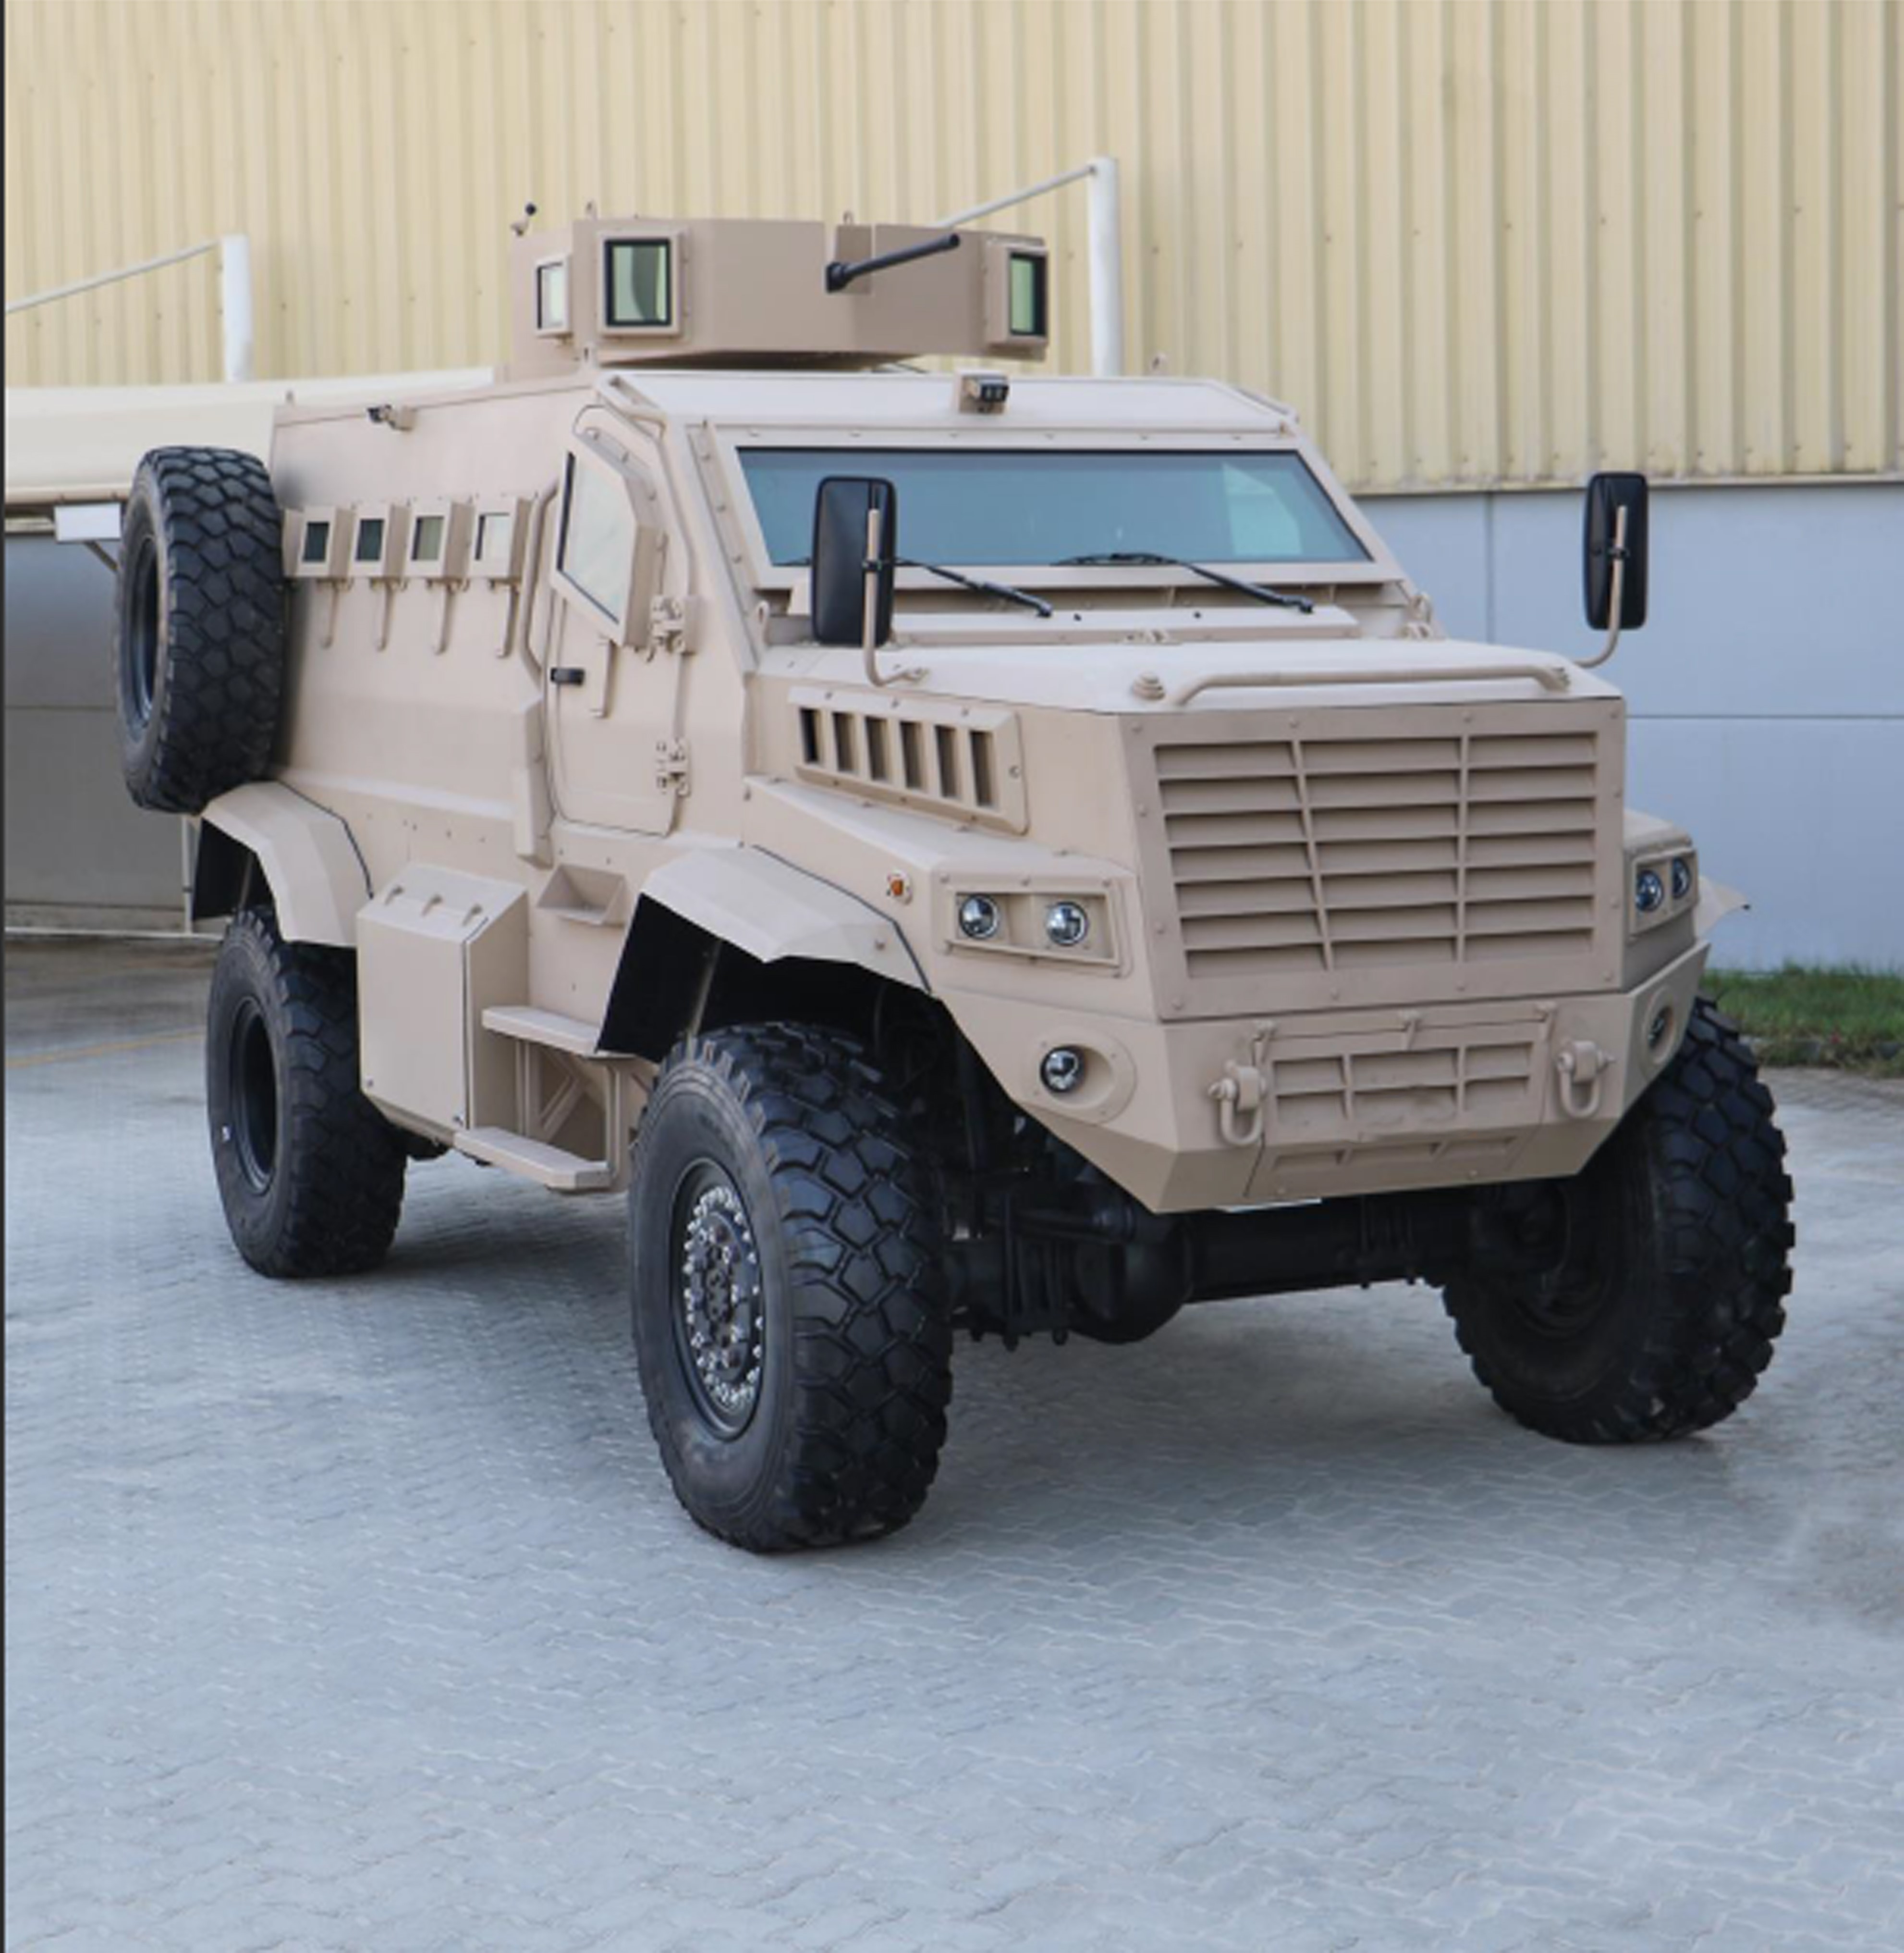 2 x BR6 BALKAN 616 MRAP Diesel 4x4 (12 Seater) with Opaque and transparent armor up to STANAG 4569 Level 3 - ONLY 2 units ready for immediate sale!